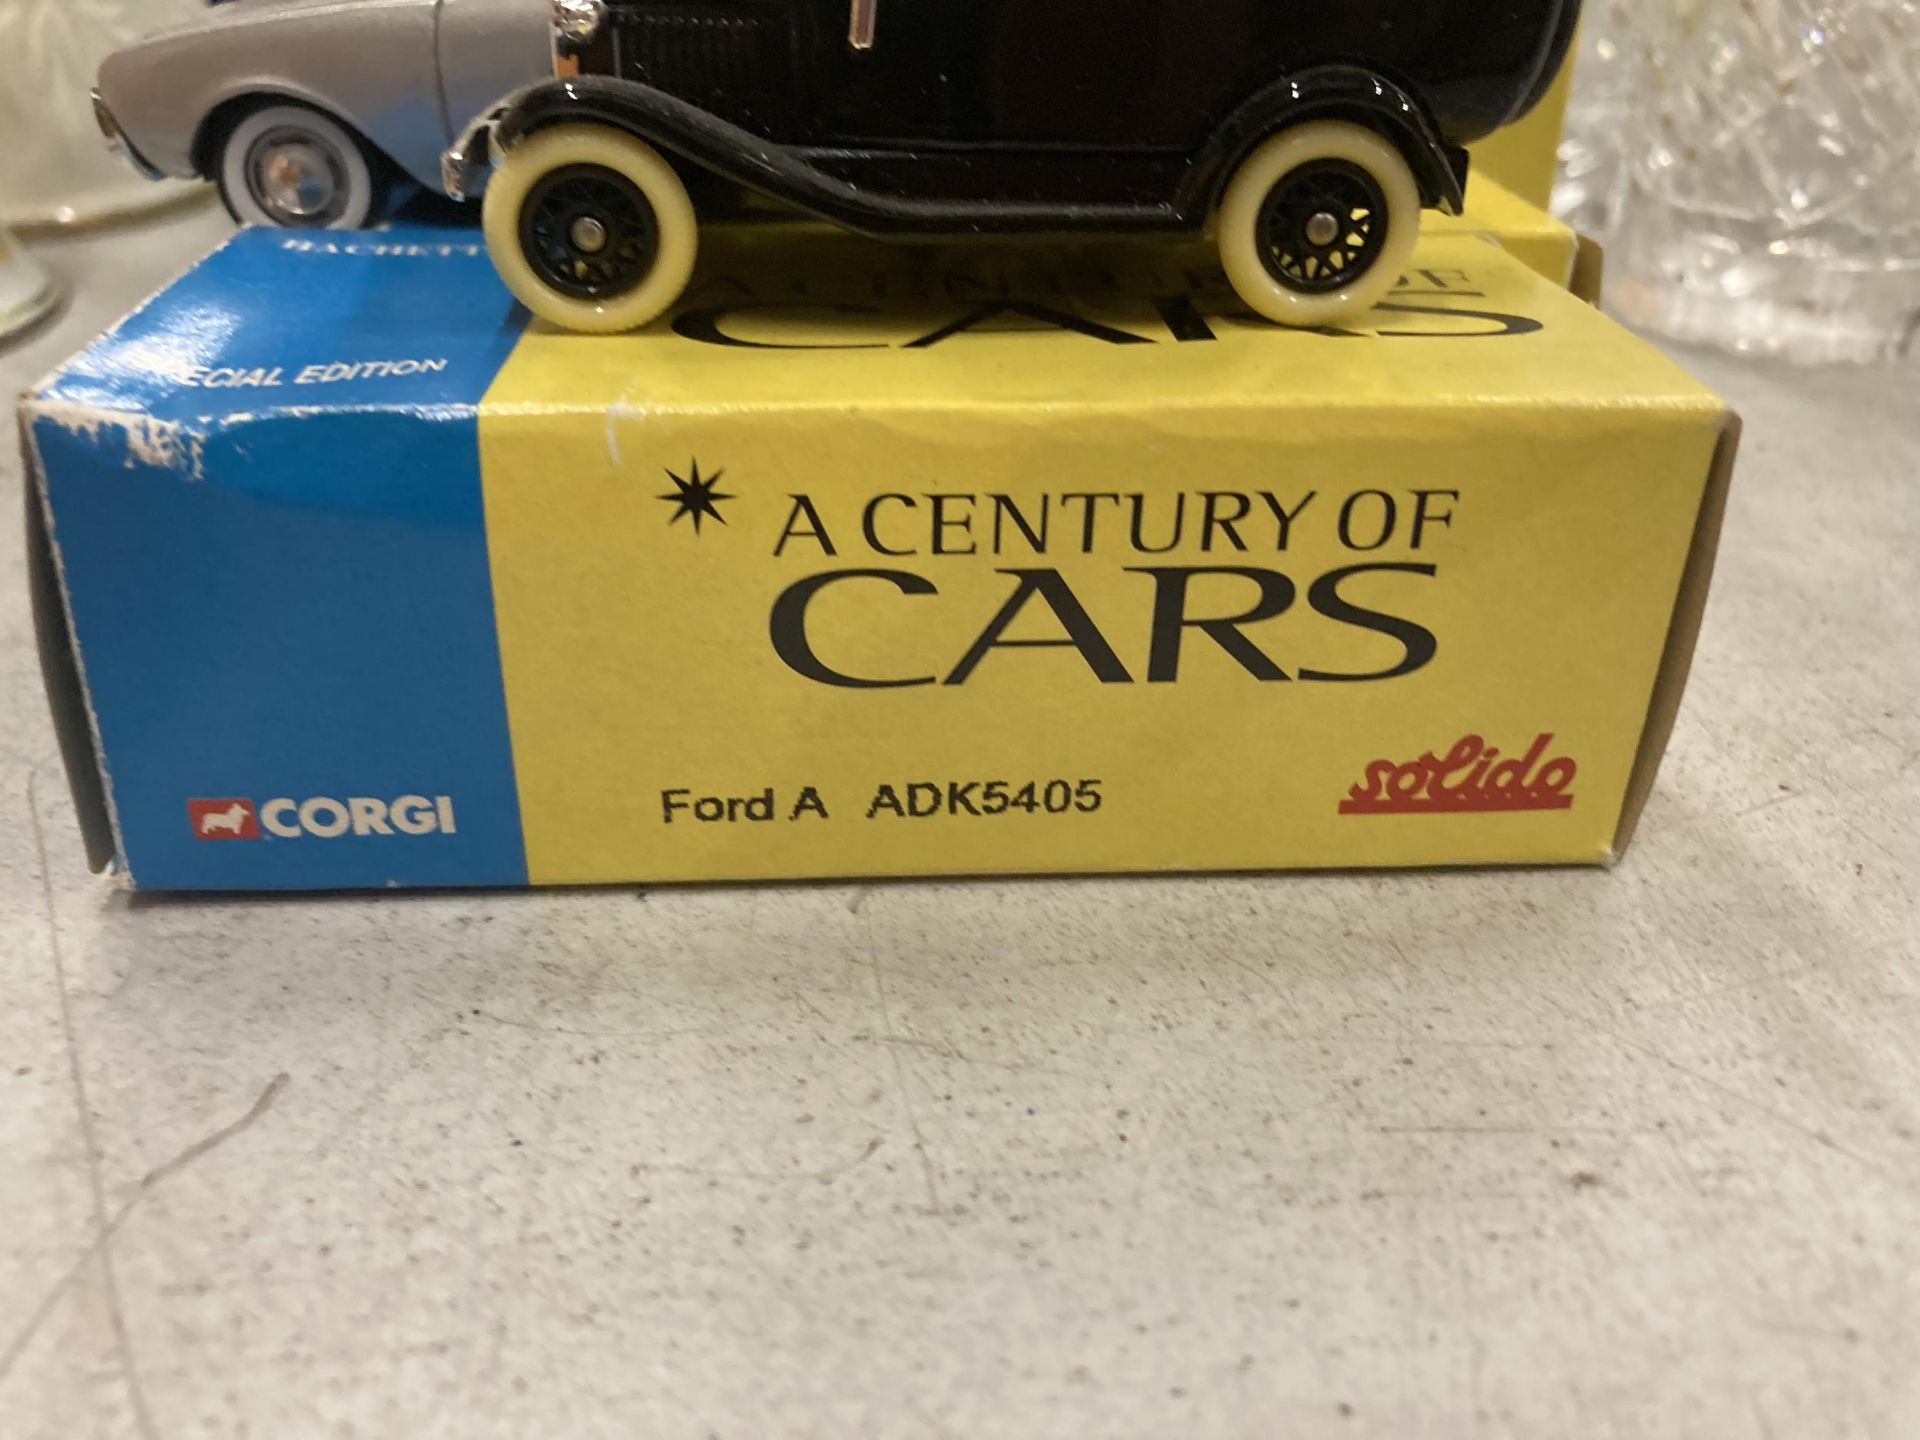 A GROUP OF FIVE BOXED CORGI DIECAST CAR MODELS - Image 3 of 3